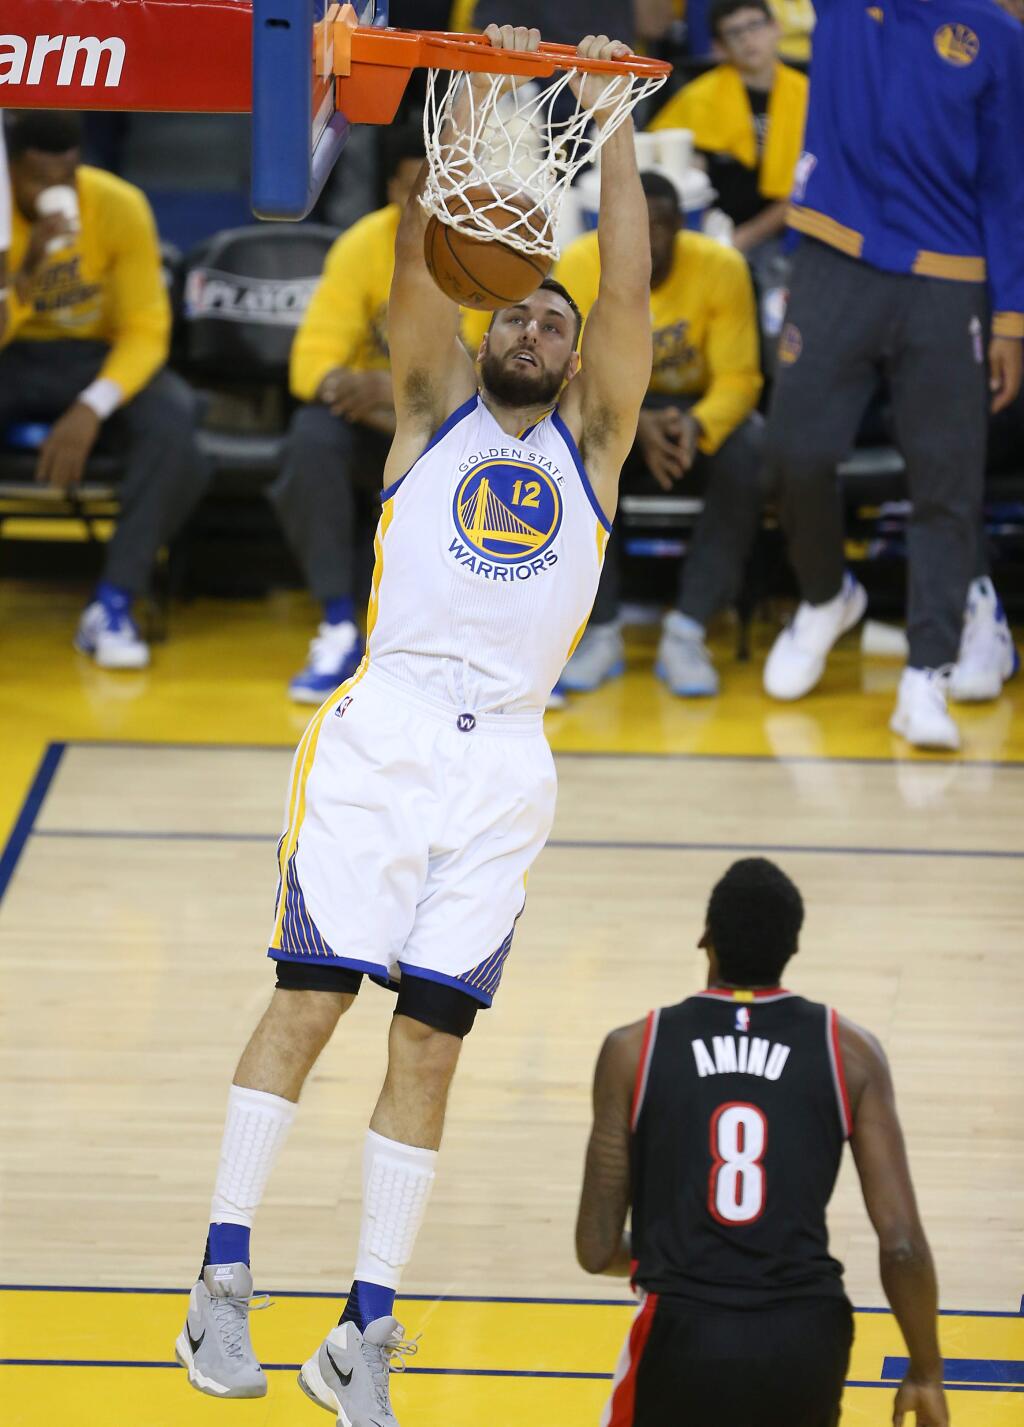 Golden State Warriors center Andrew Bogut dunks the ball on an alley-oop pass against the Portland Trail Blazers, during their game in Oakland on Sunday, May 1, 2016. The Warriors defeated the Trail Blazers 118-106. (Christopher Chung/ The Press Democrat)